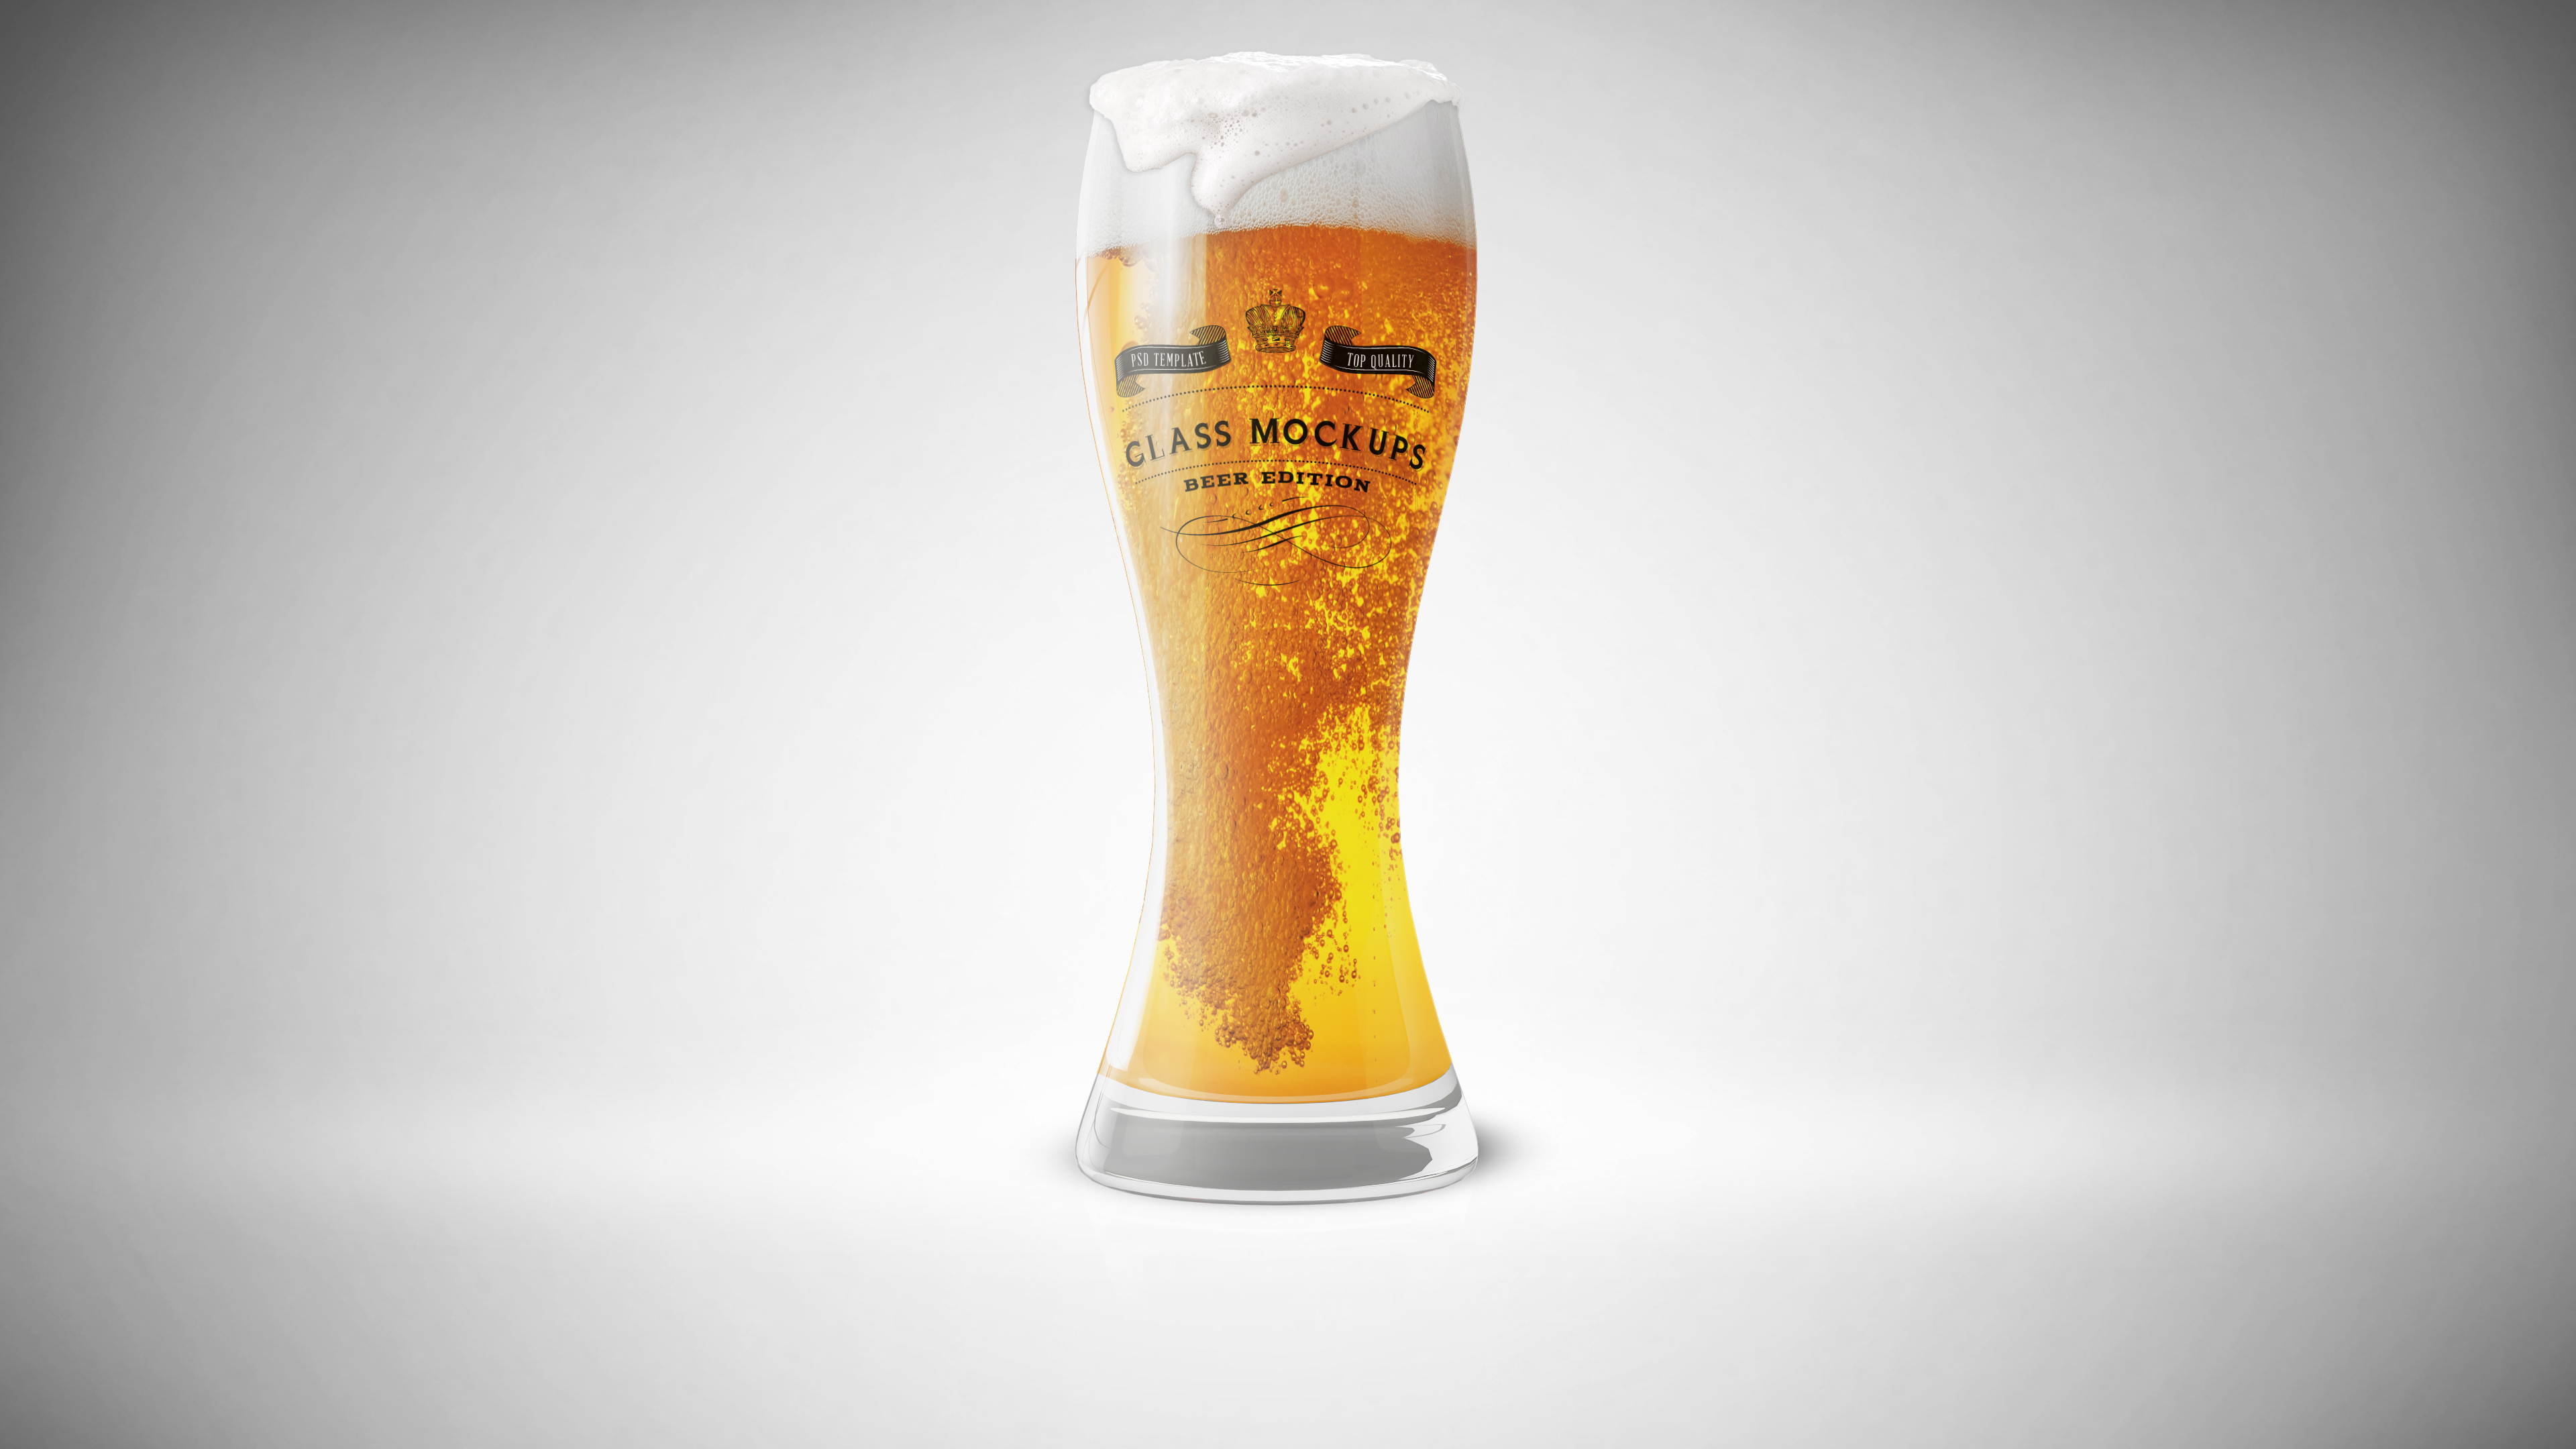 Mockup Beer Glass Free / Beer glass and bottle with label mockup | Free PSD File : Today's ...